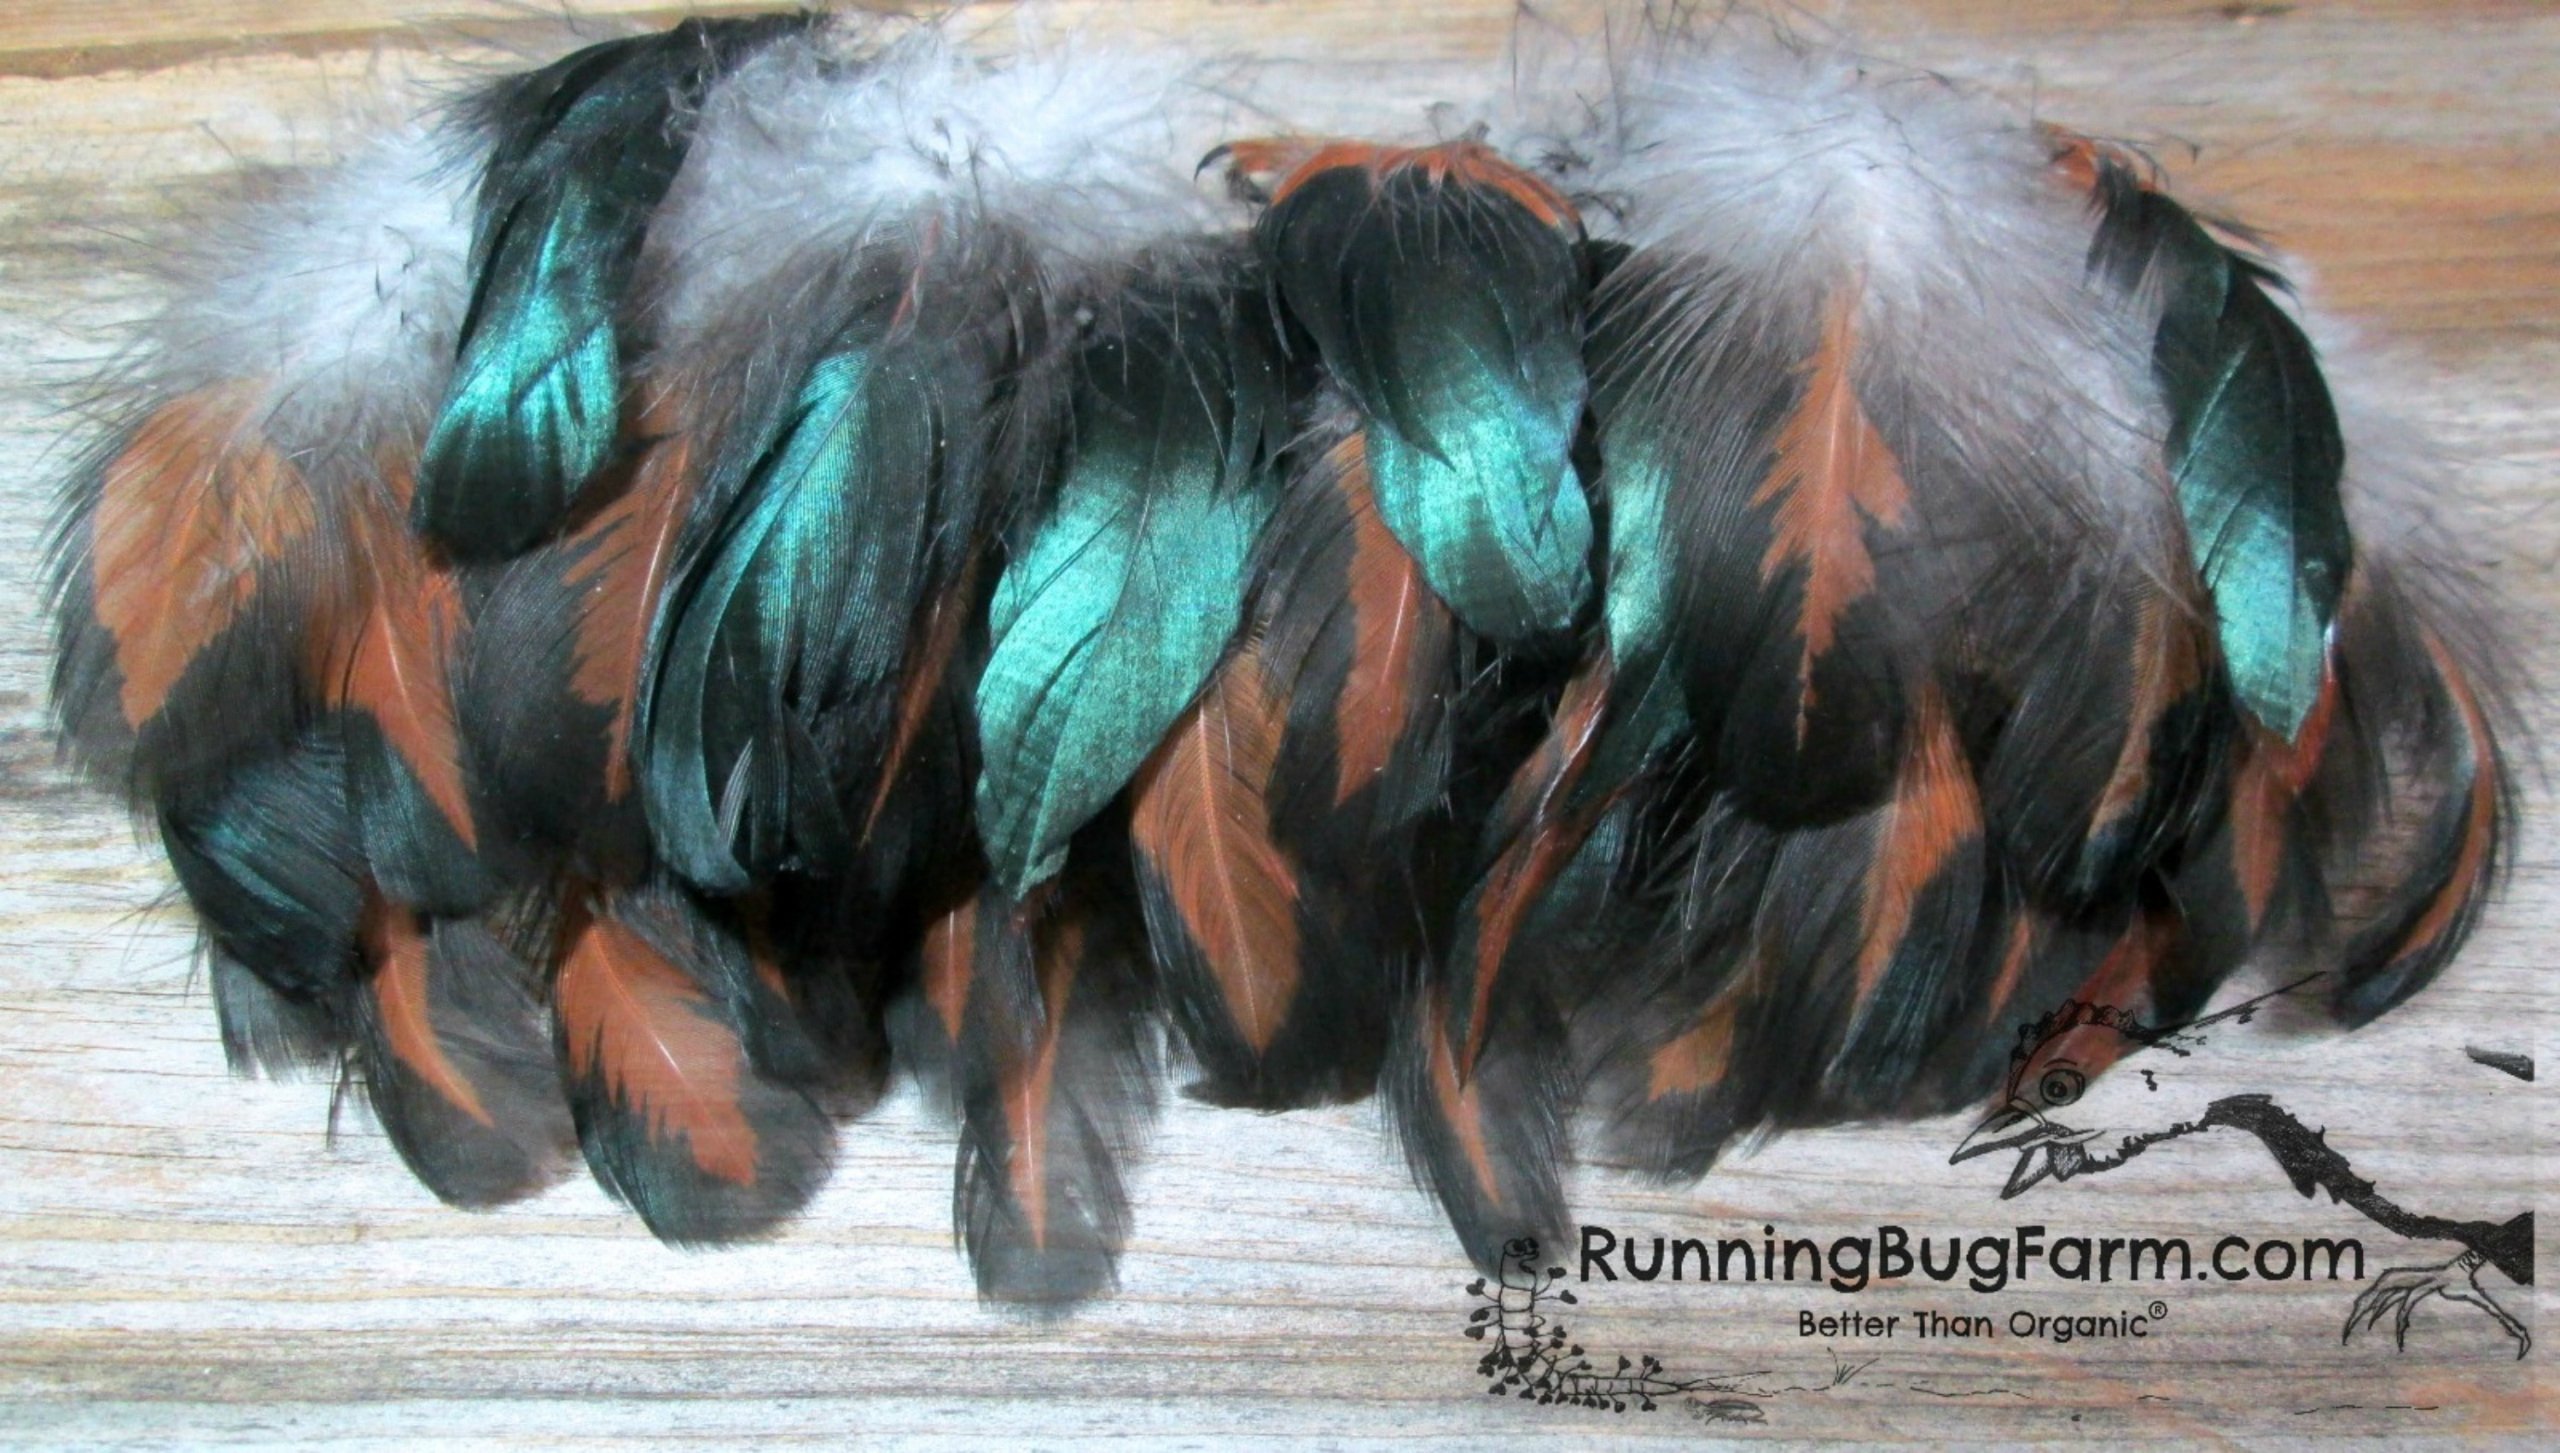 Real Black and Red Rooster Tail Feathers for Crafts from Humanely